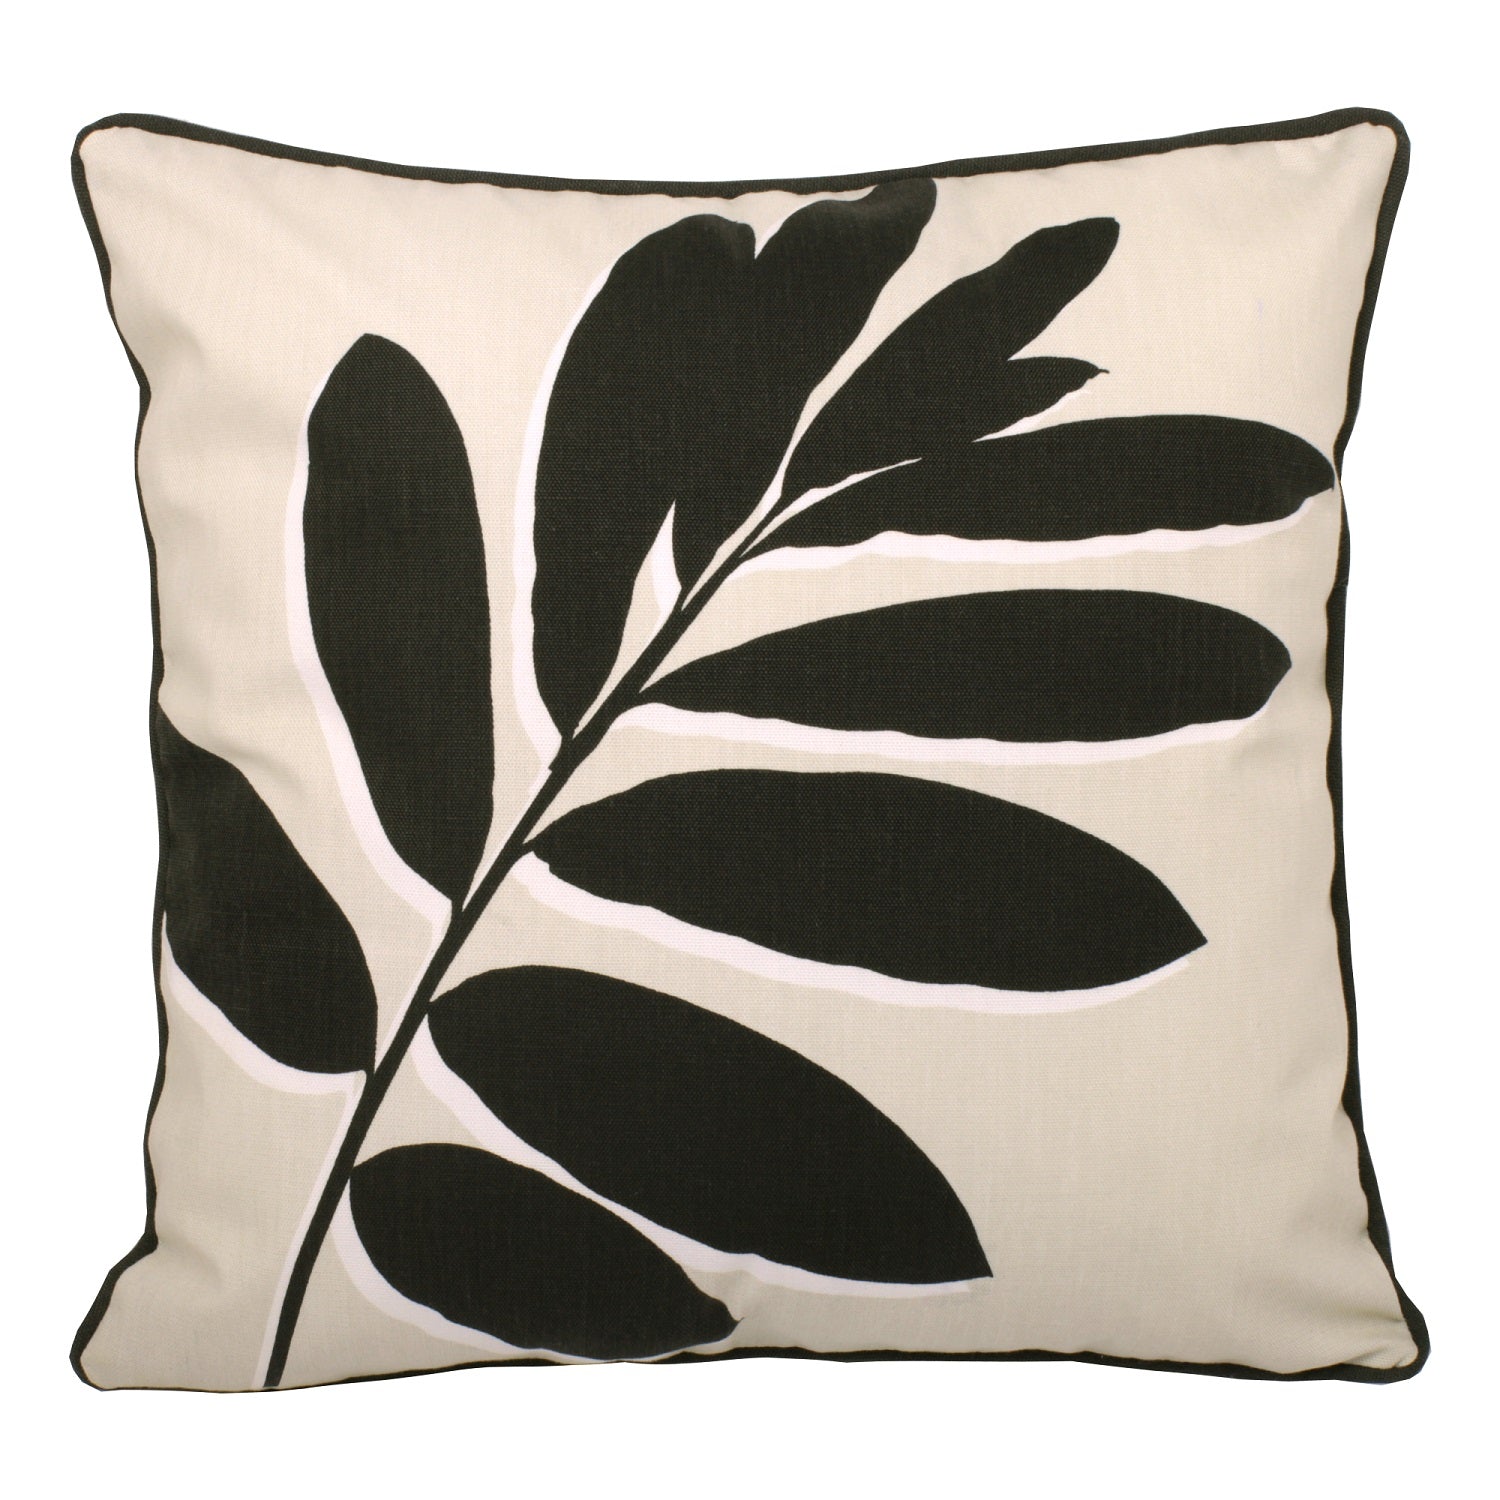 Garden Outdoor Water Resistant Filled Cushion - Natural & Black